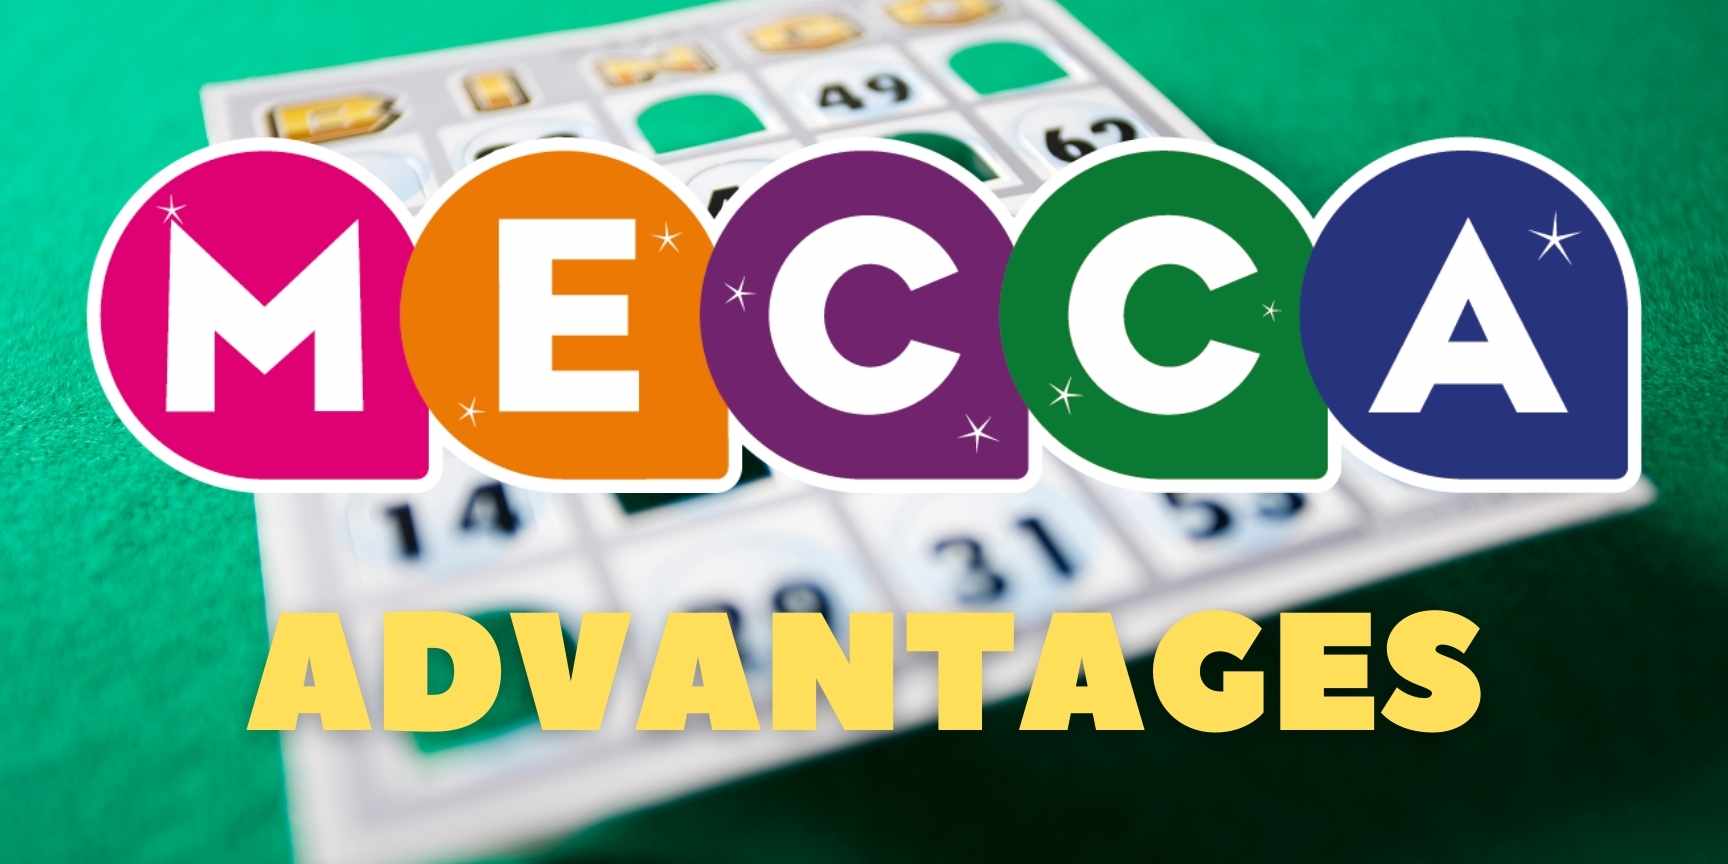 All advantages to use Mecca Bingo for winning post thumbnail image